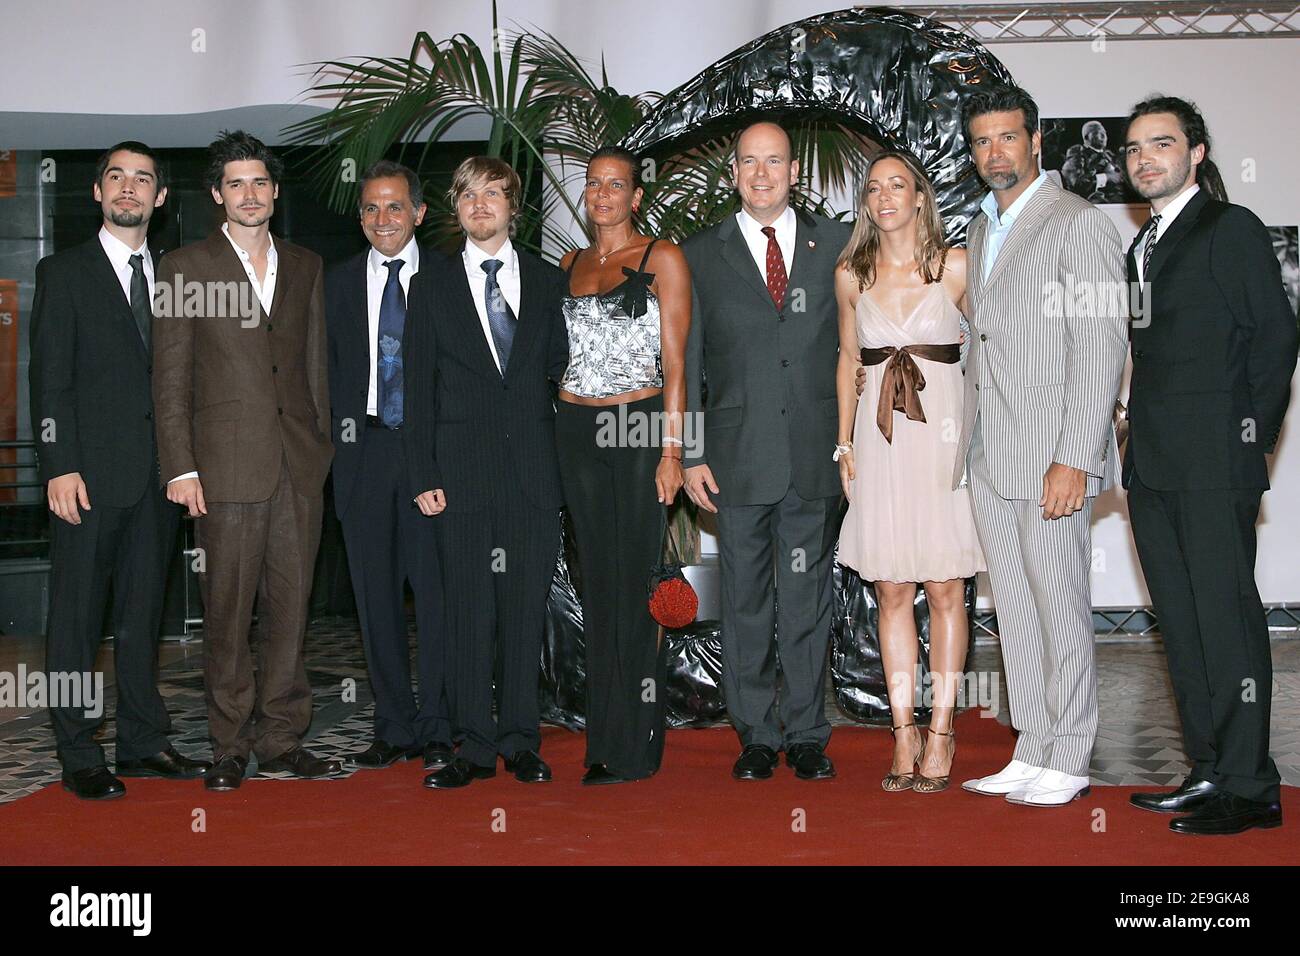 (l to r) Kyo members, Princess Stephanie of Monaco, Prince Albert II, Roch Voisine and his wife Myrian arrive at the 'Figh Aids Monaco' party held at the Sporting in Monaco, on July 21, 2006. Photo by Nebinger-Orban/ABACAPRESS.COM Stock Photo